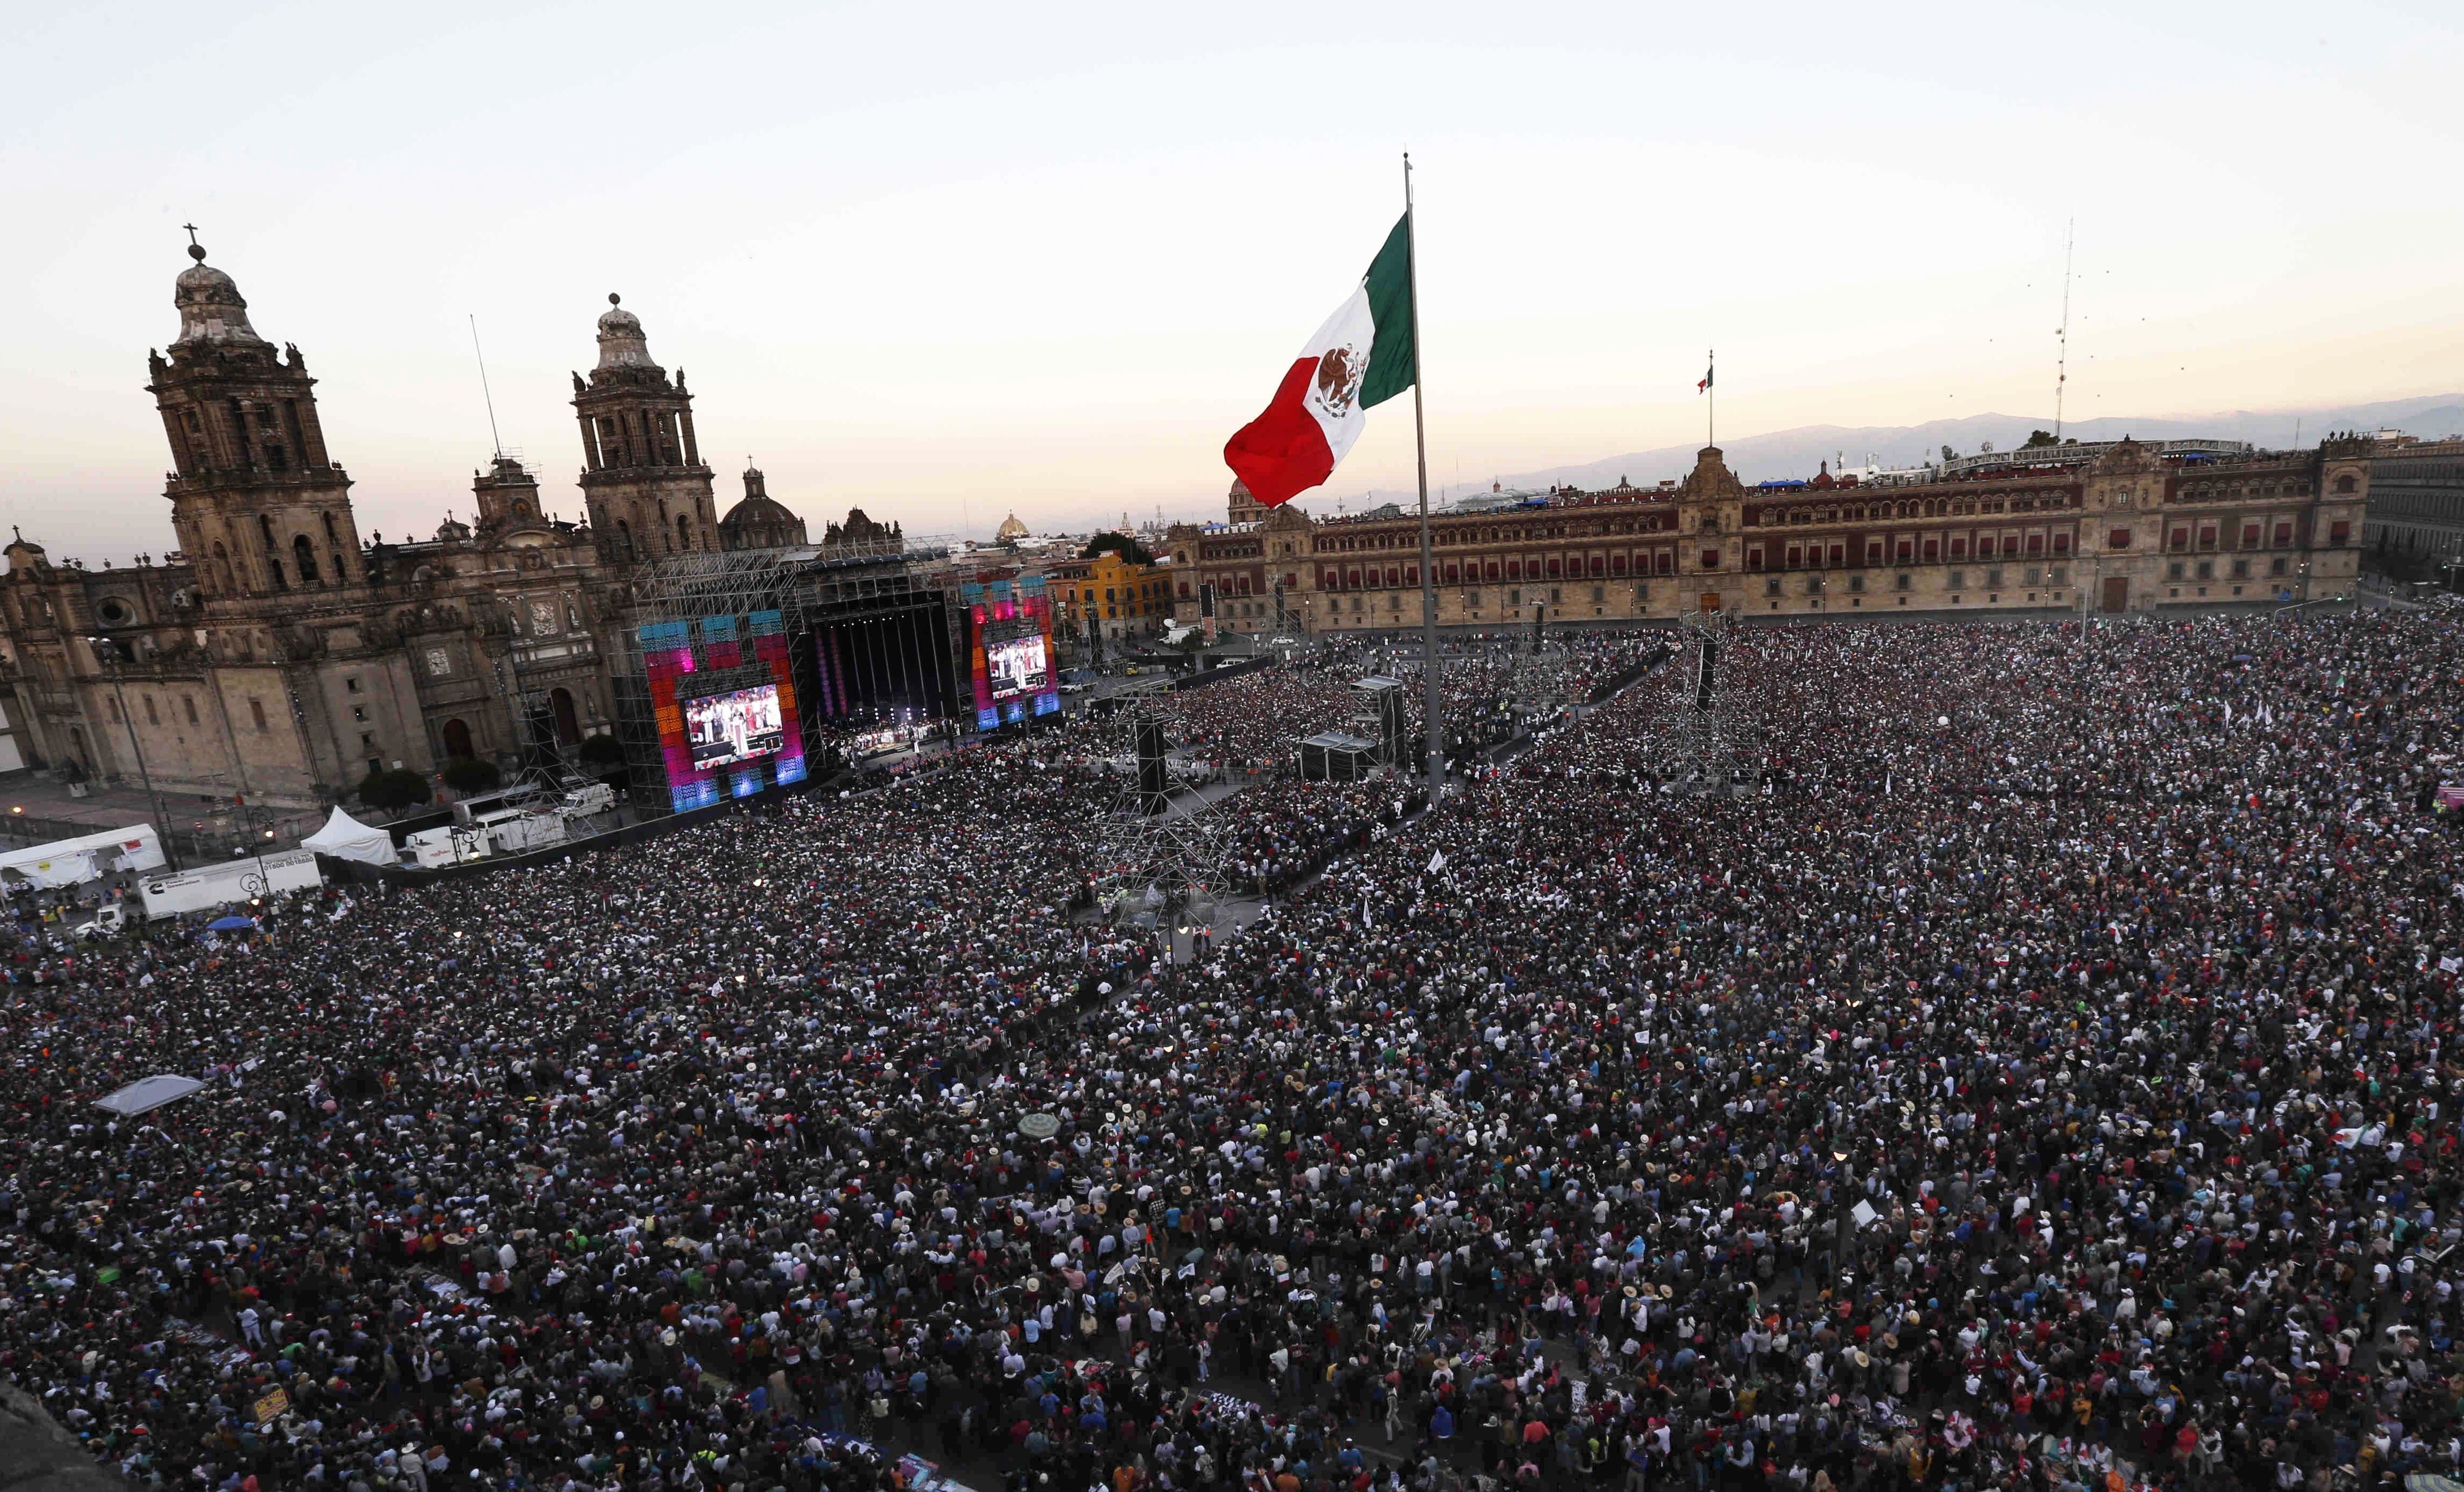 Celebrants take part in a traditional ceremony in which Mexico's newly sworn-in President Andres Manuel Lopez Obrador is formally anointed leader by indigenous groups, at the Zocalo, in Mexico City, Saturday, Dec. 1, 2018. Mexico has more than 70 indigenous communities, and Lopez Obrador has pledged to end centuries of poverty and marginalization for them. (AP Photo/Marco Ugarte)